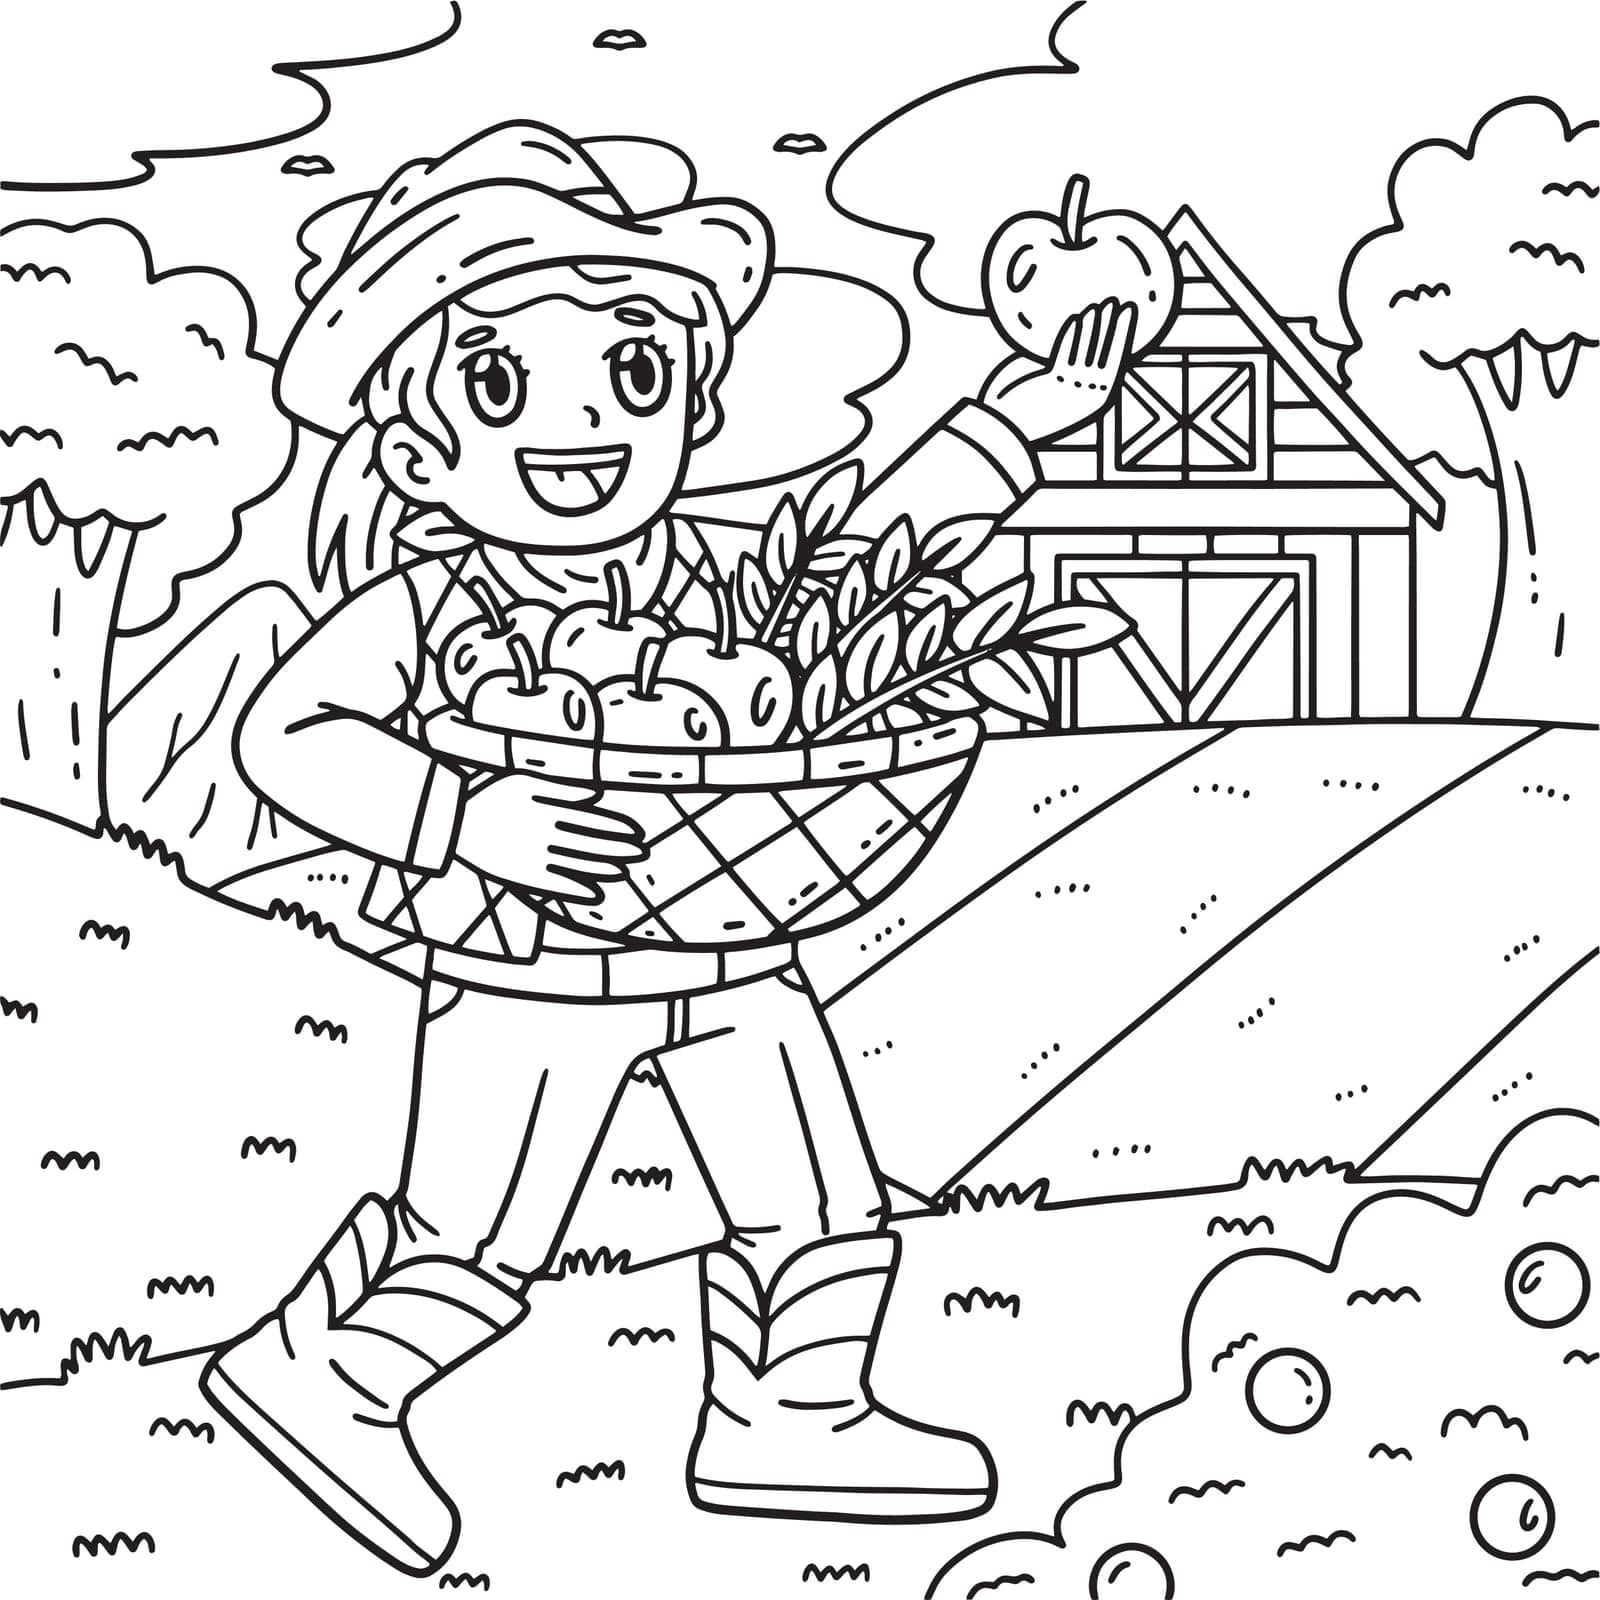 A cute and funny coloring page of a Cowgirl with a Basket of Apples and Wheat. Provides hours of coloring fun for children. To color, this page is very easy. Suitable for little kids and toddlers.